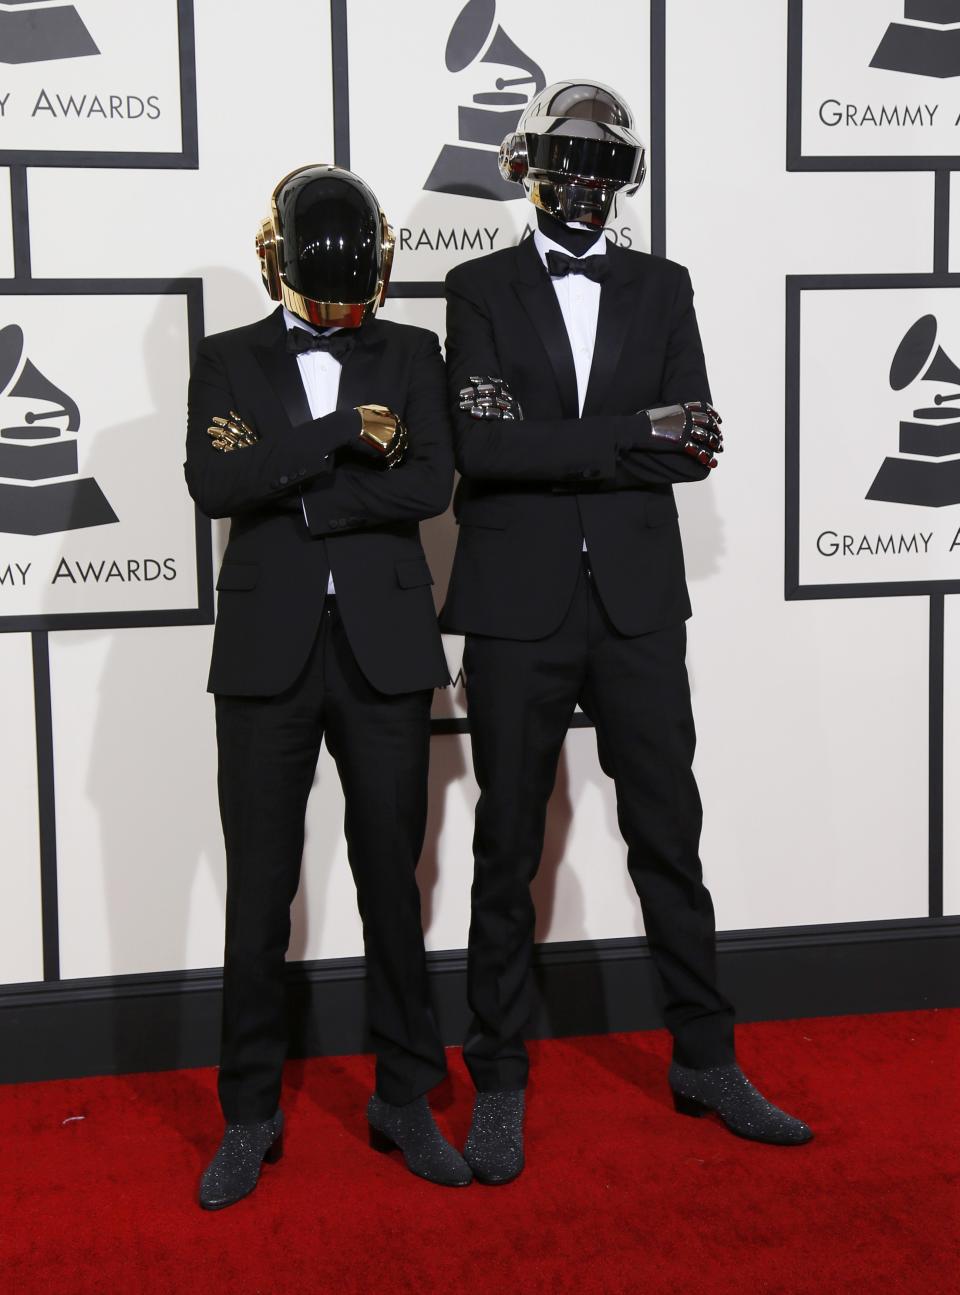 Daft Punk arrives at the 56th annual Grammy Awards in Los Angeles